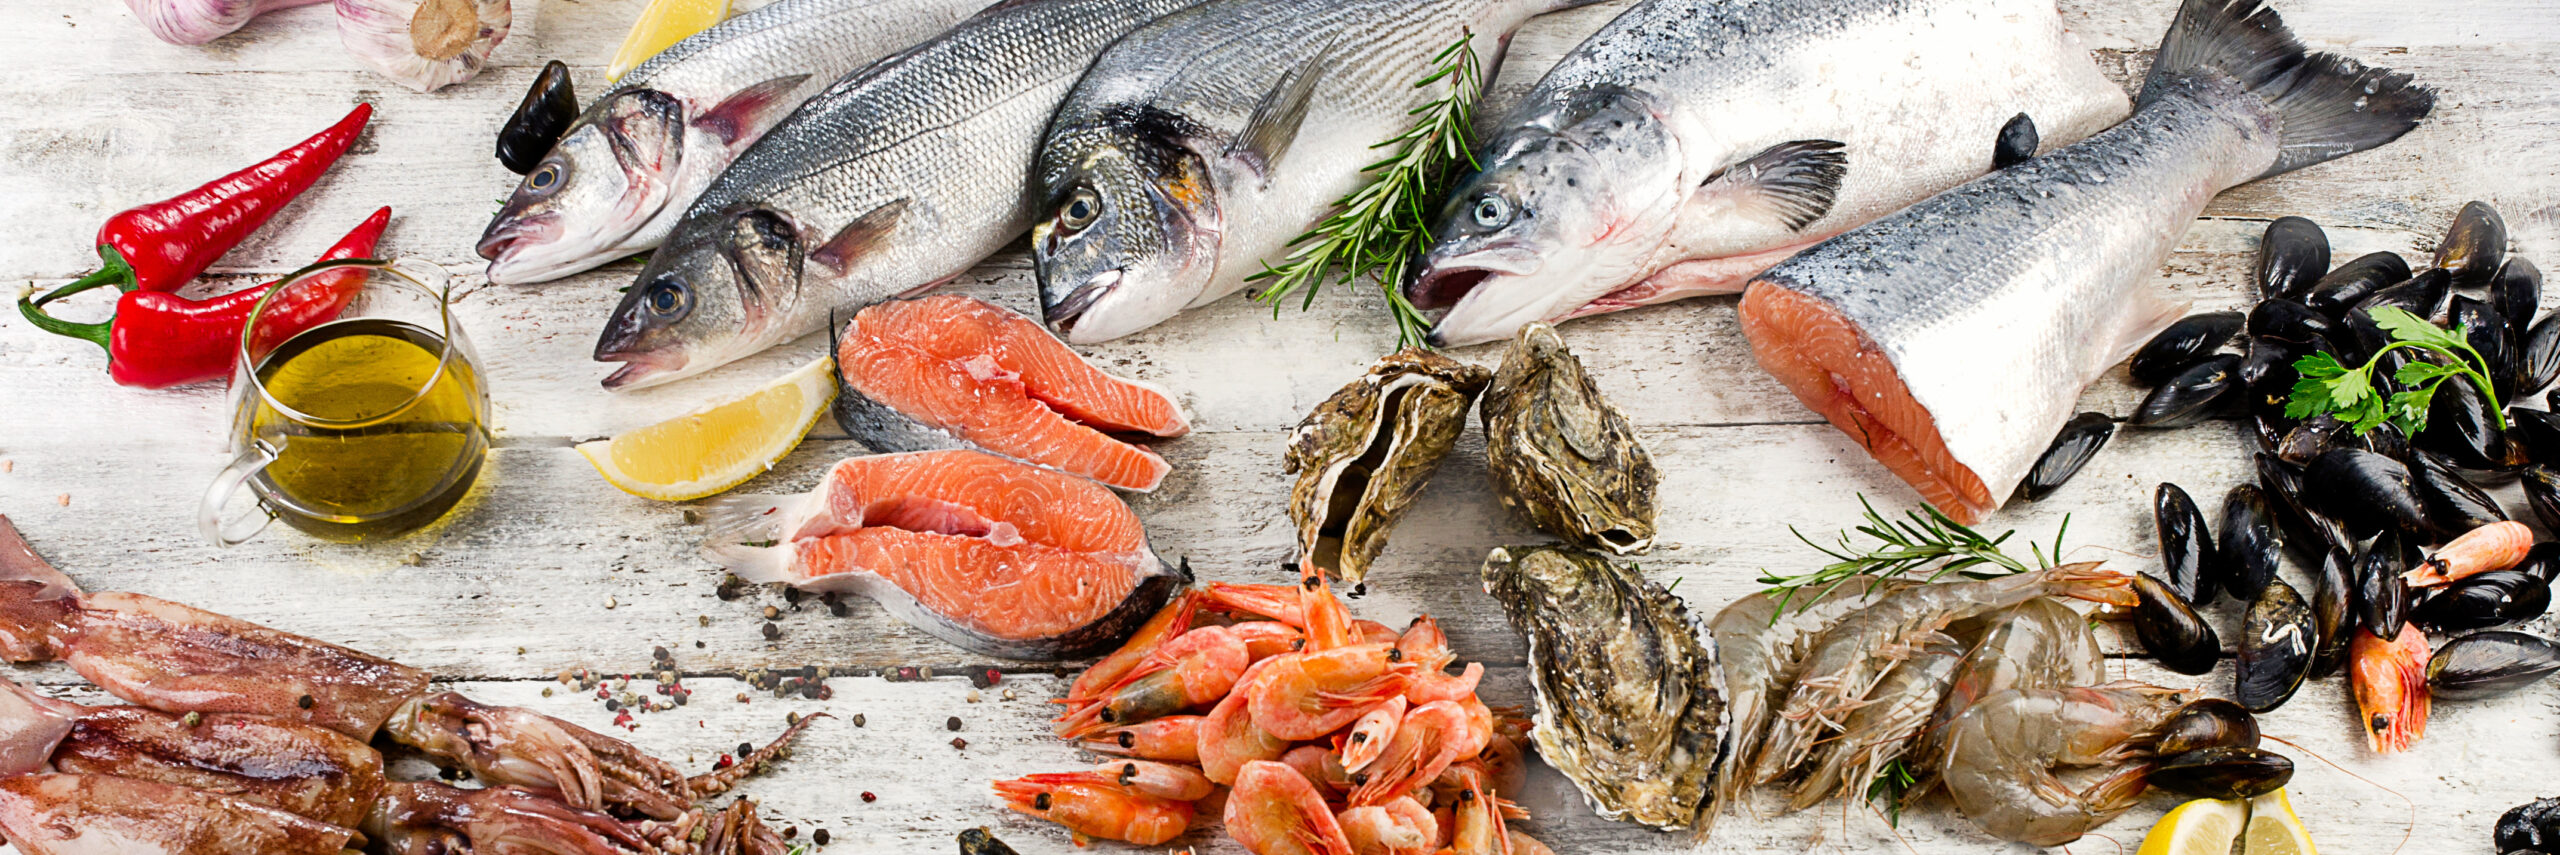 Omega-3 Fatty Acids Linked To Healthy Aging